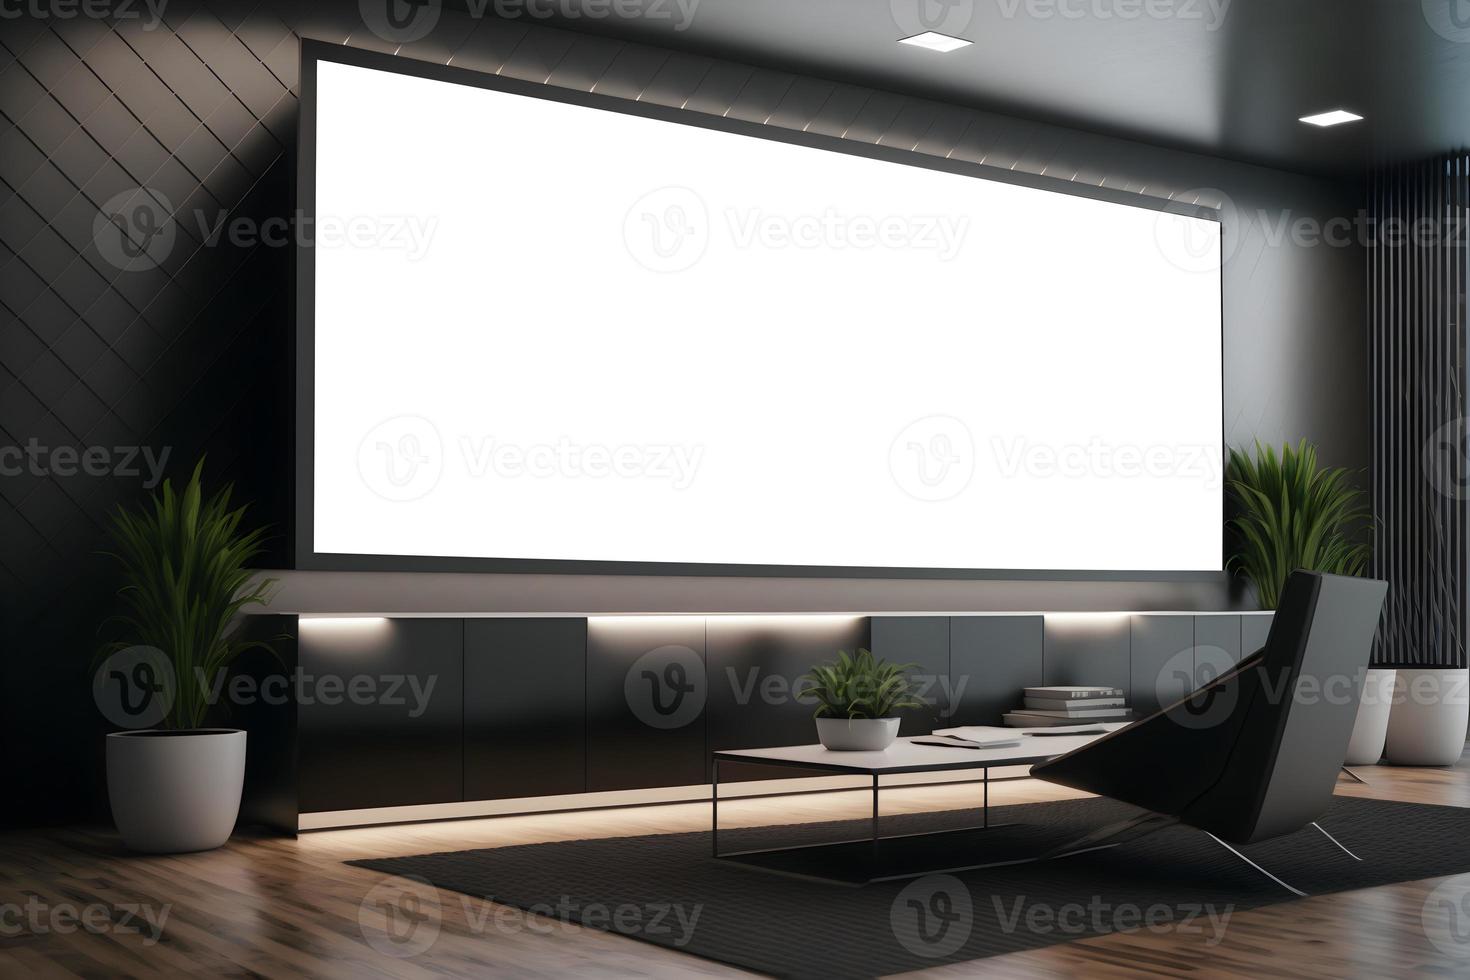 Wide horizontal led screen for presentation in seminar or at conference room, Corporate Identity Display screen in office environment - Empty Stage screen Design Mockup with modern interior photo